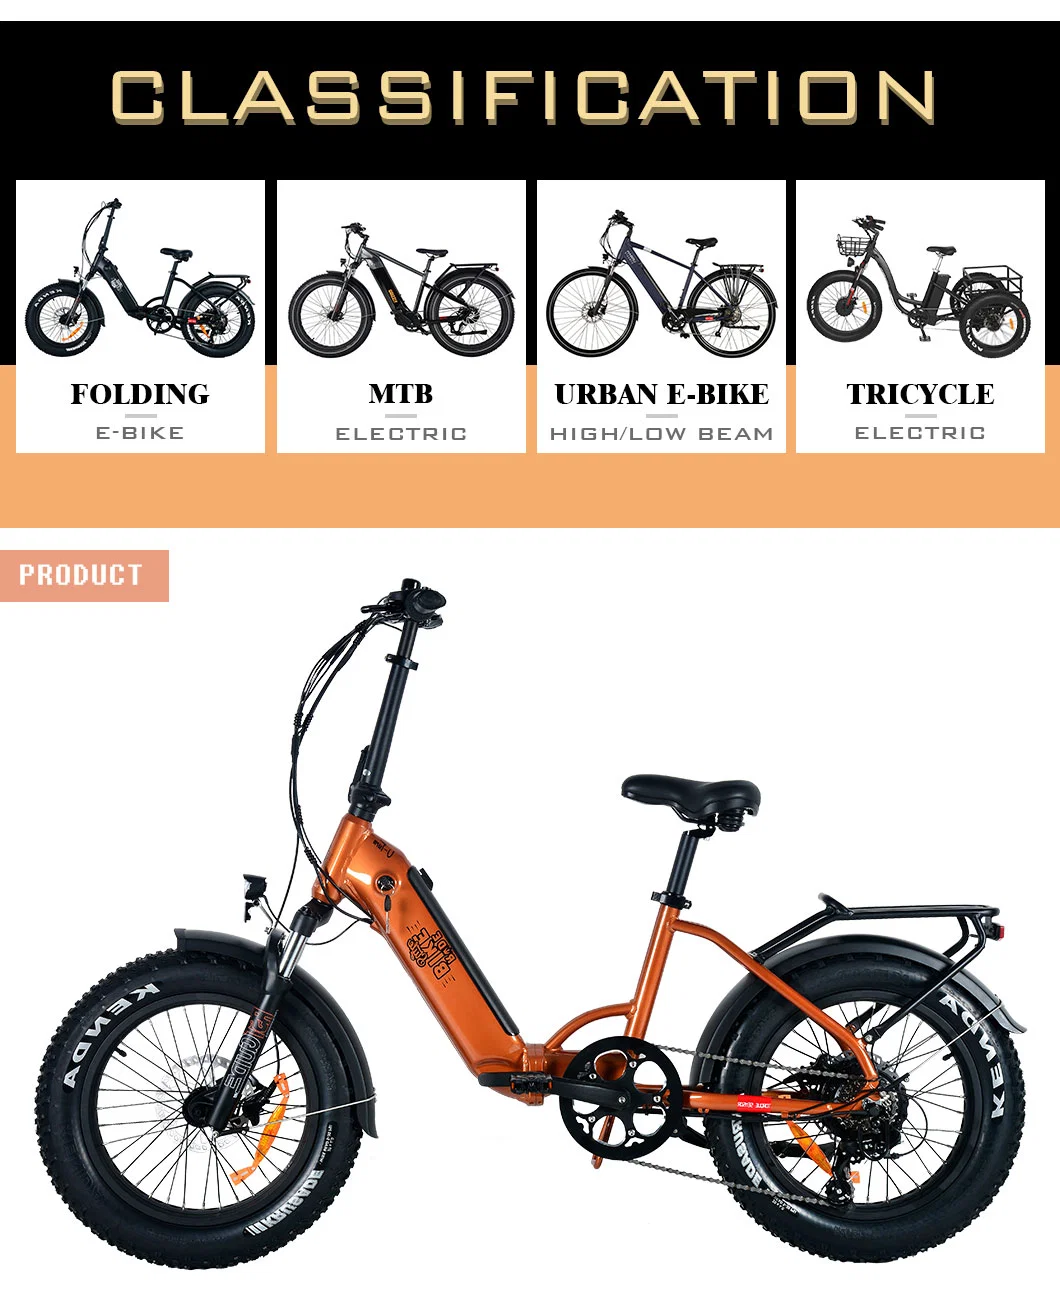 350W Aluminum Foldable Frame Electric Bicycle Folding Ebike for Women